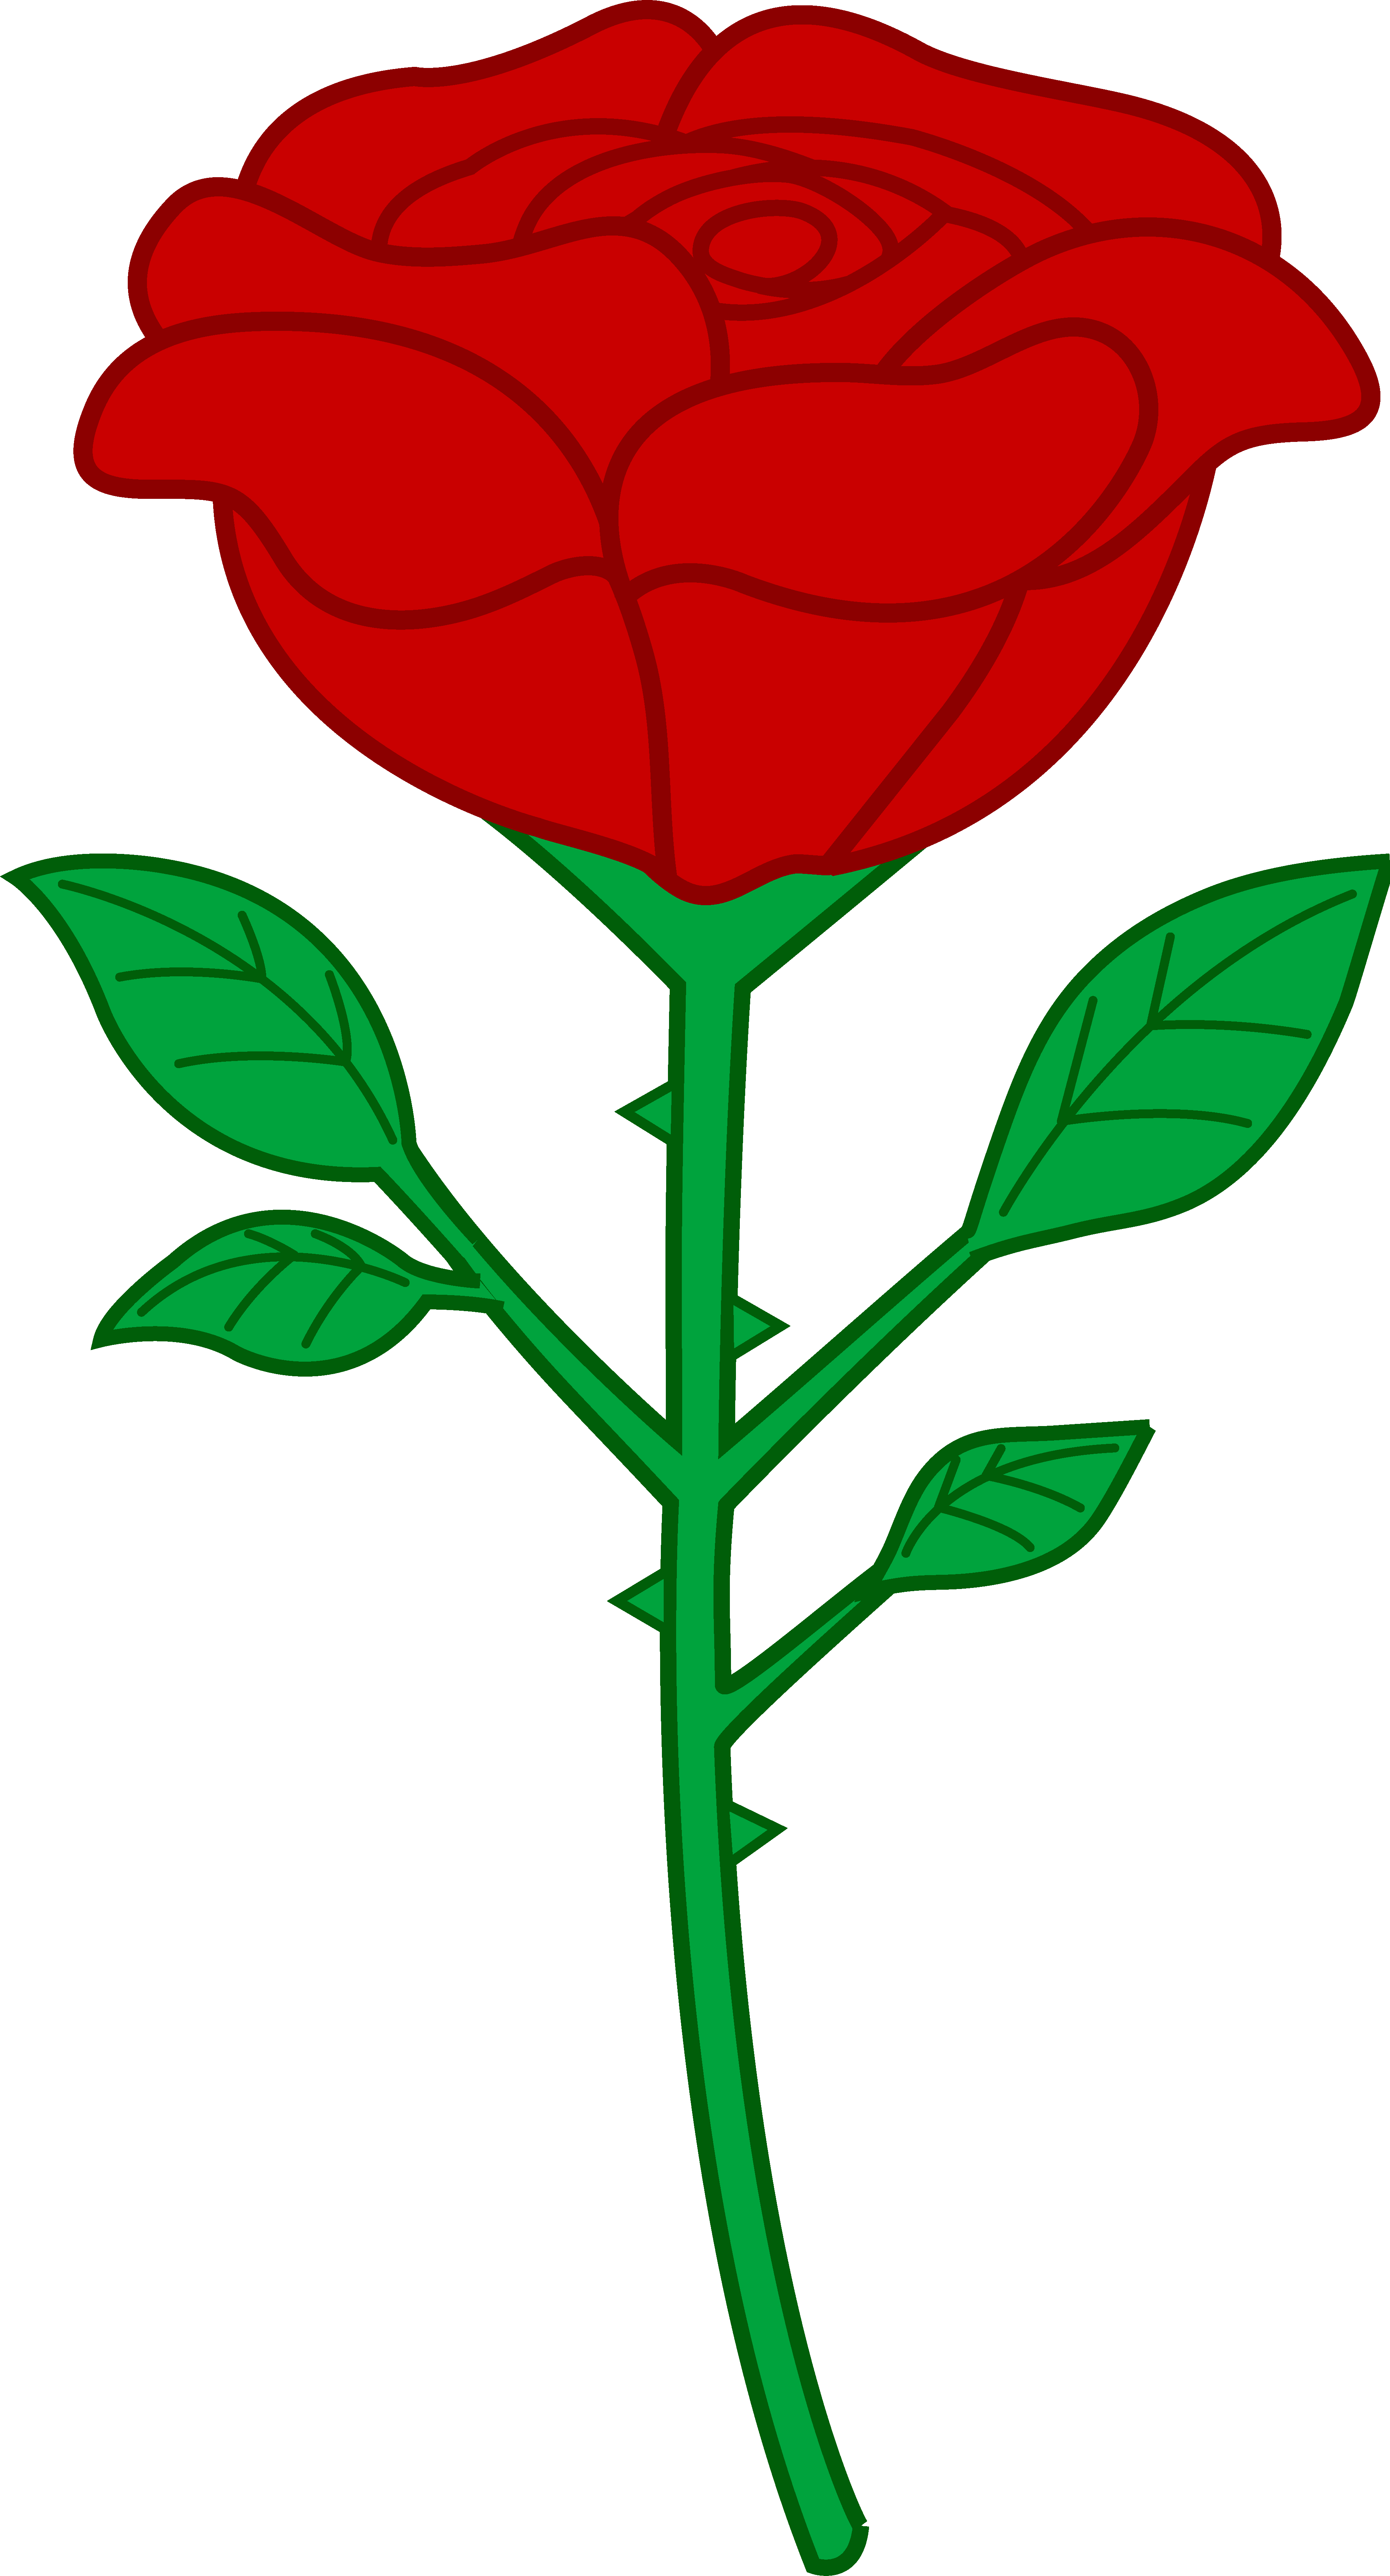 Free red rose clipart download clip art on png